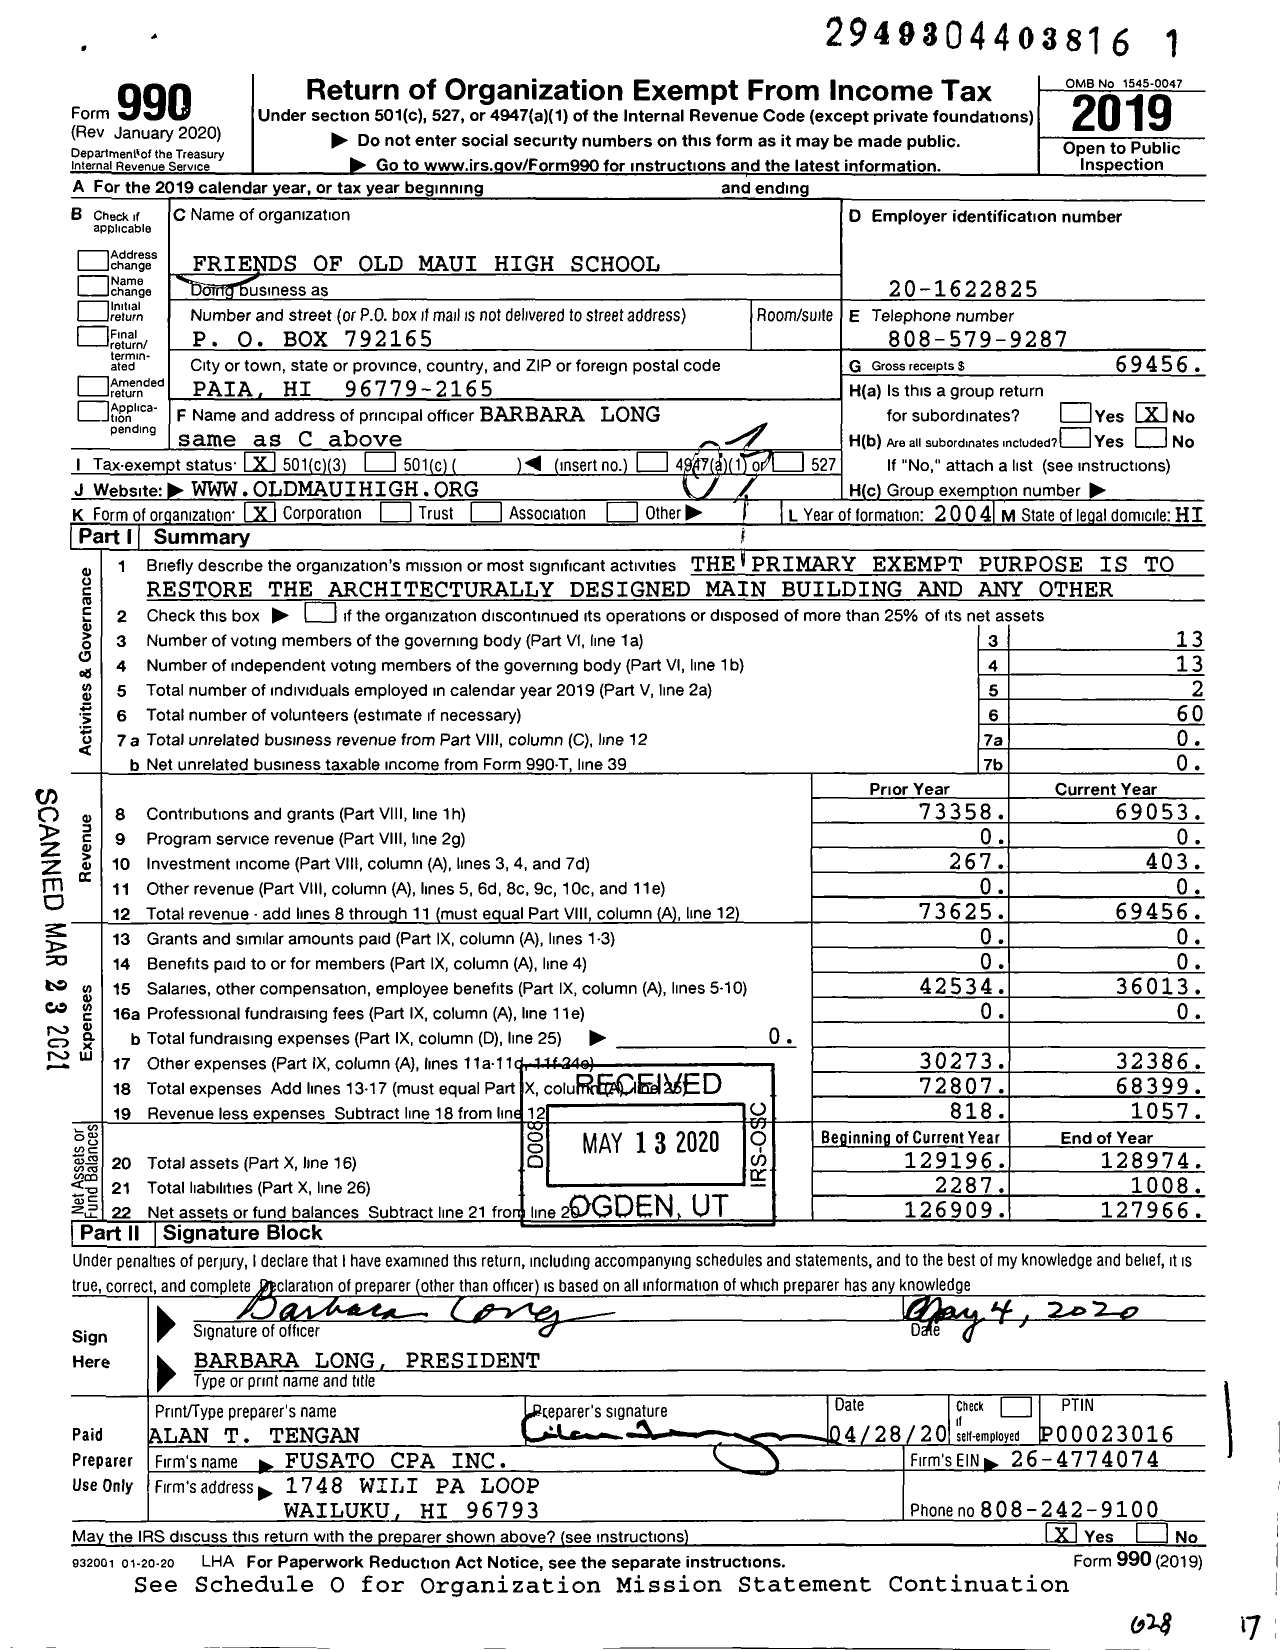 Image of first page of 2019 Form 990 for Friends of Old Maui High School